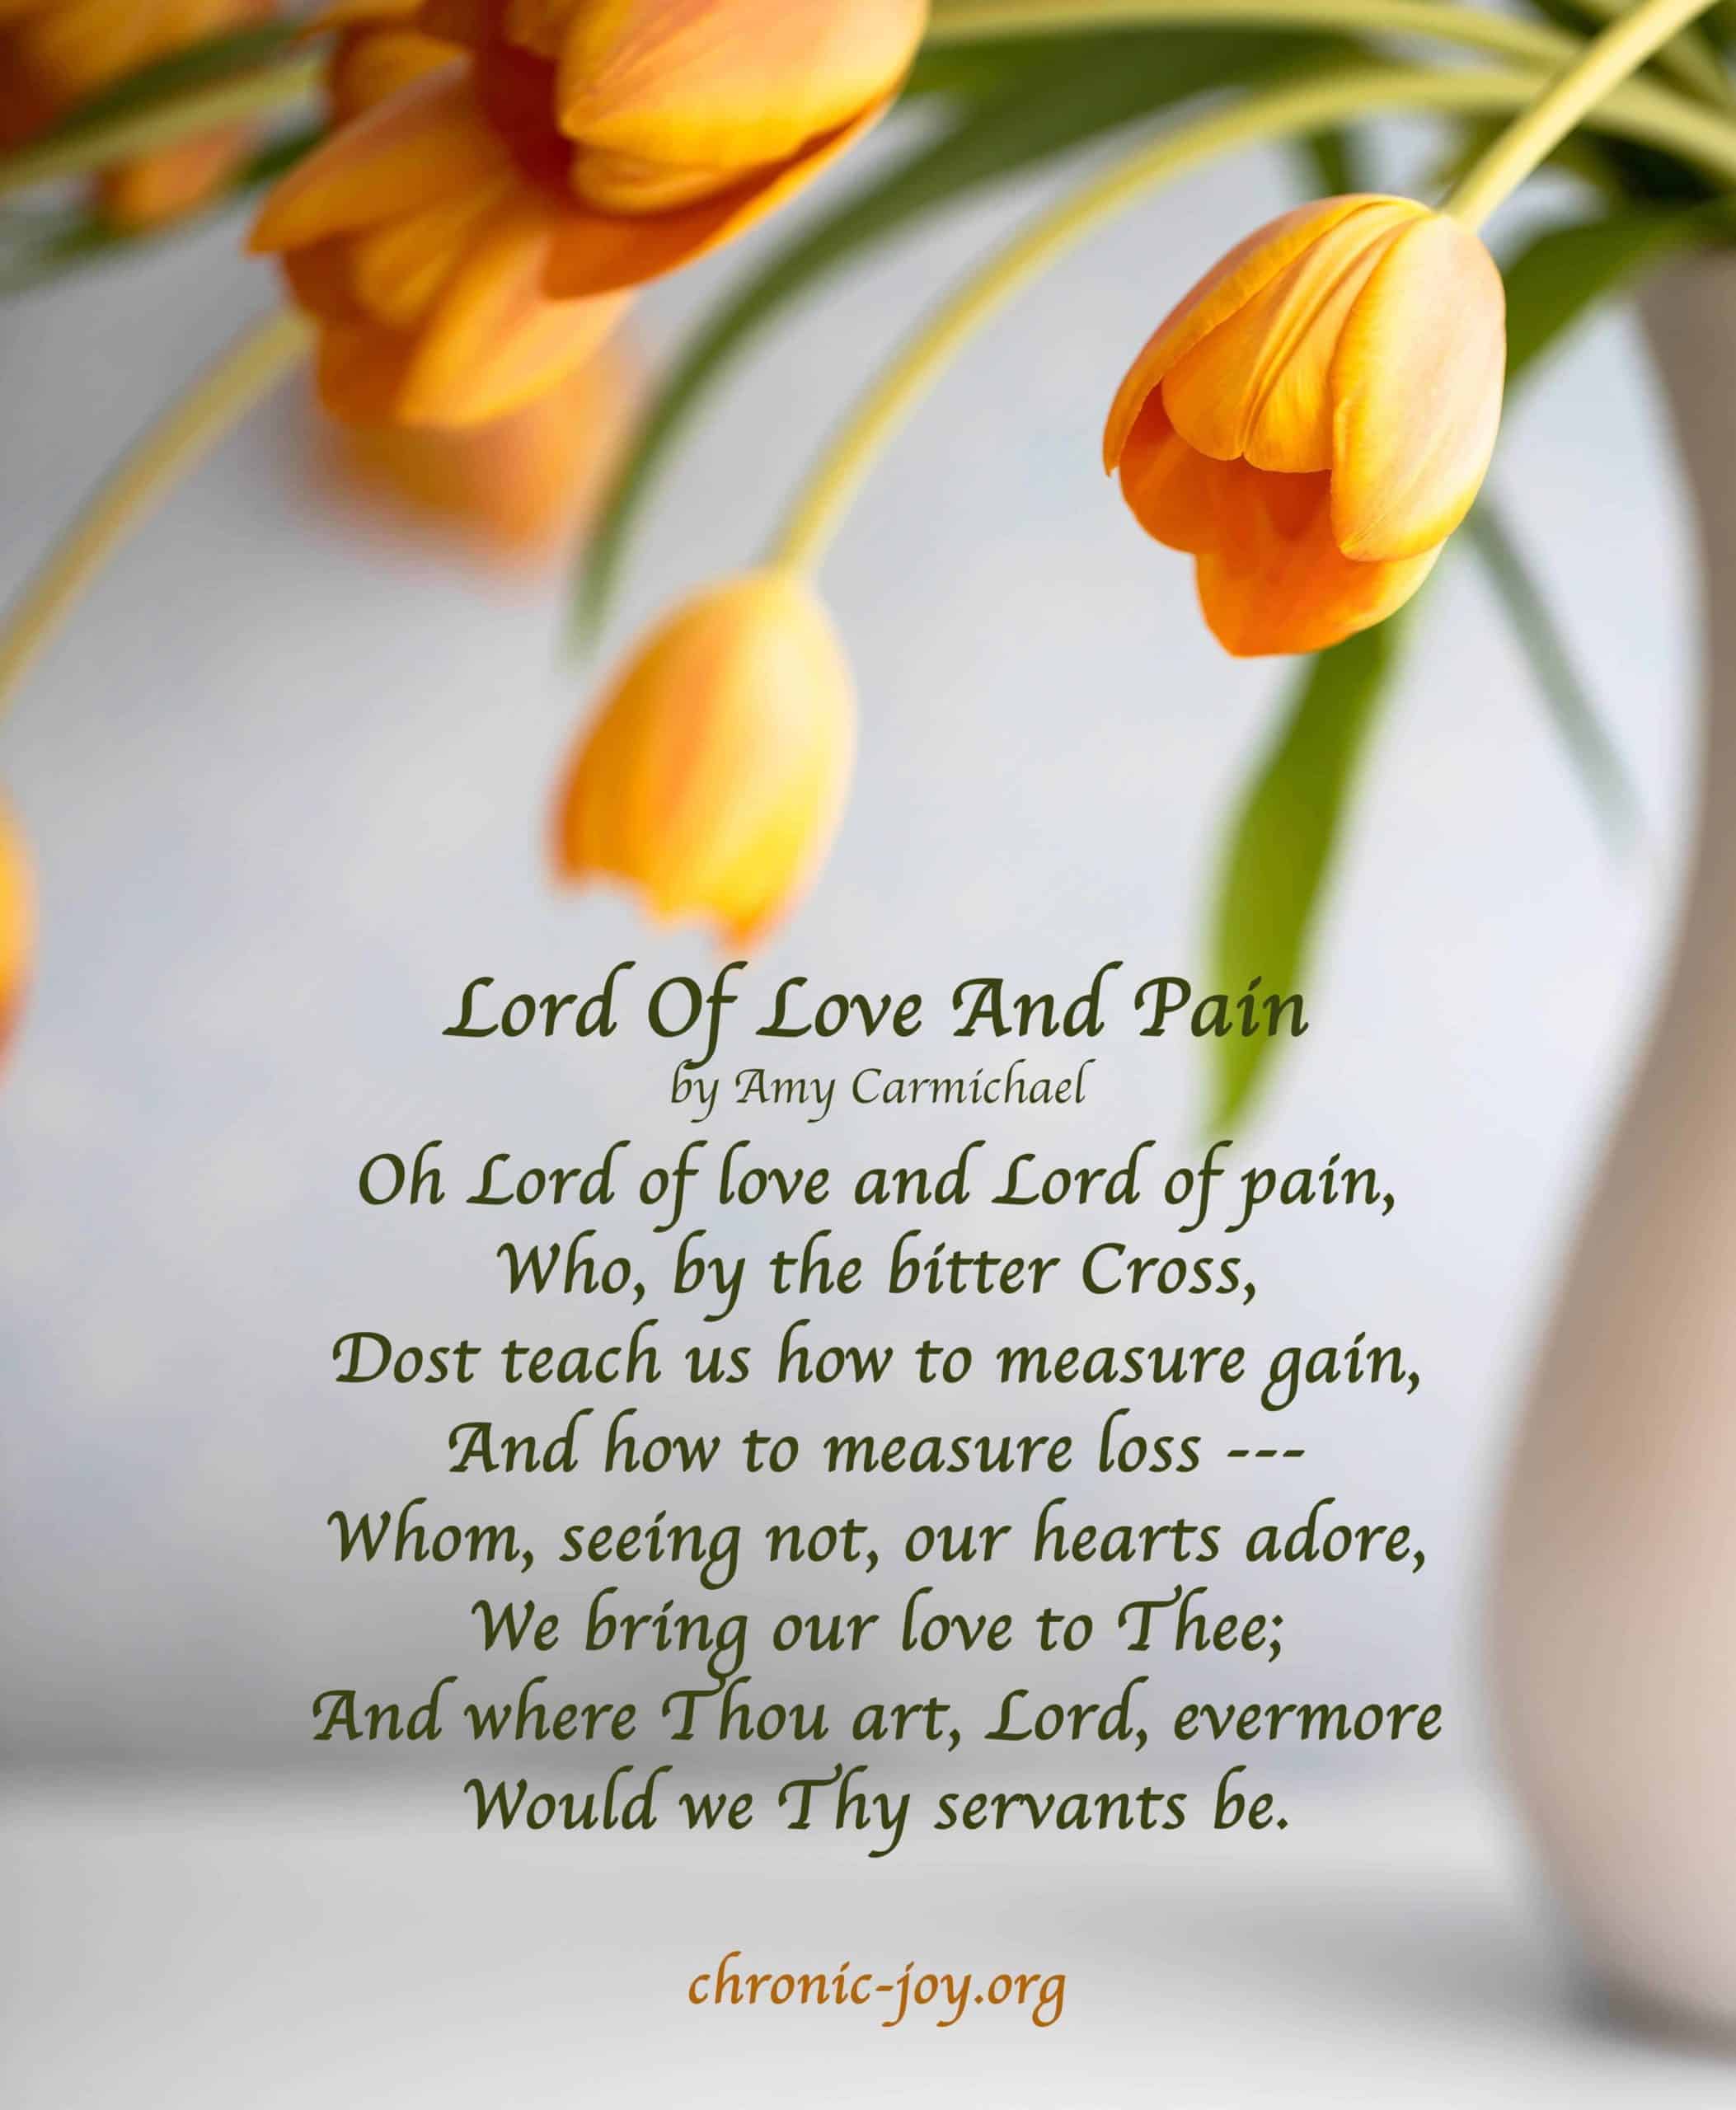 Lord of Love and Pain - Amy Carmichael